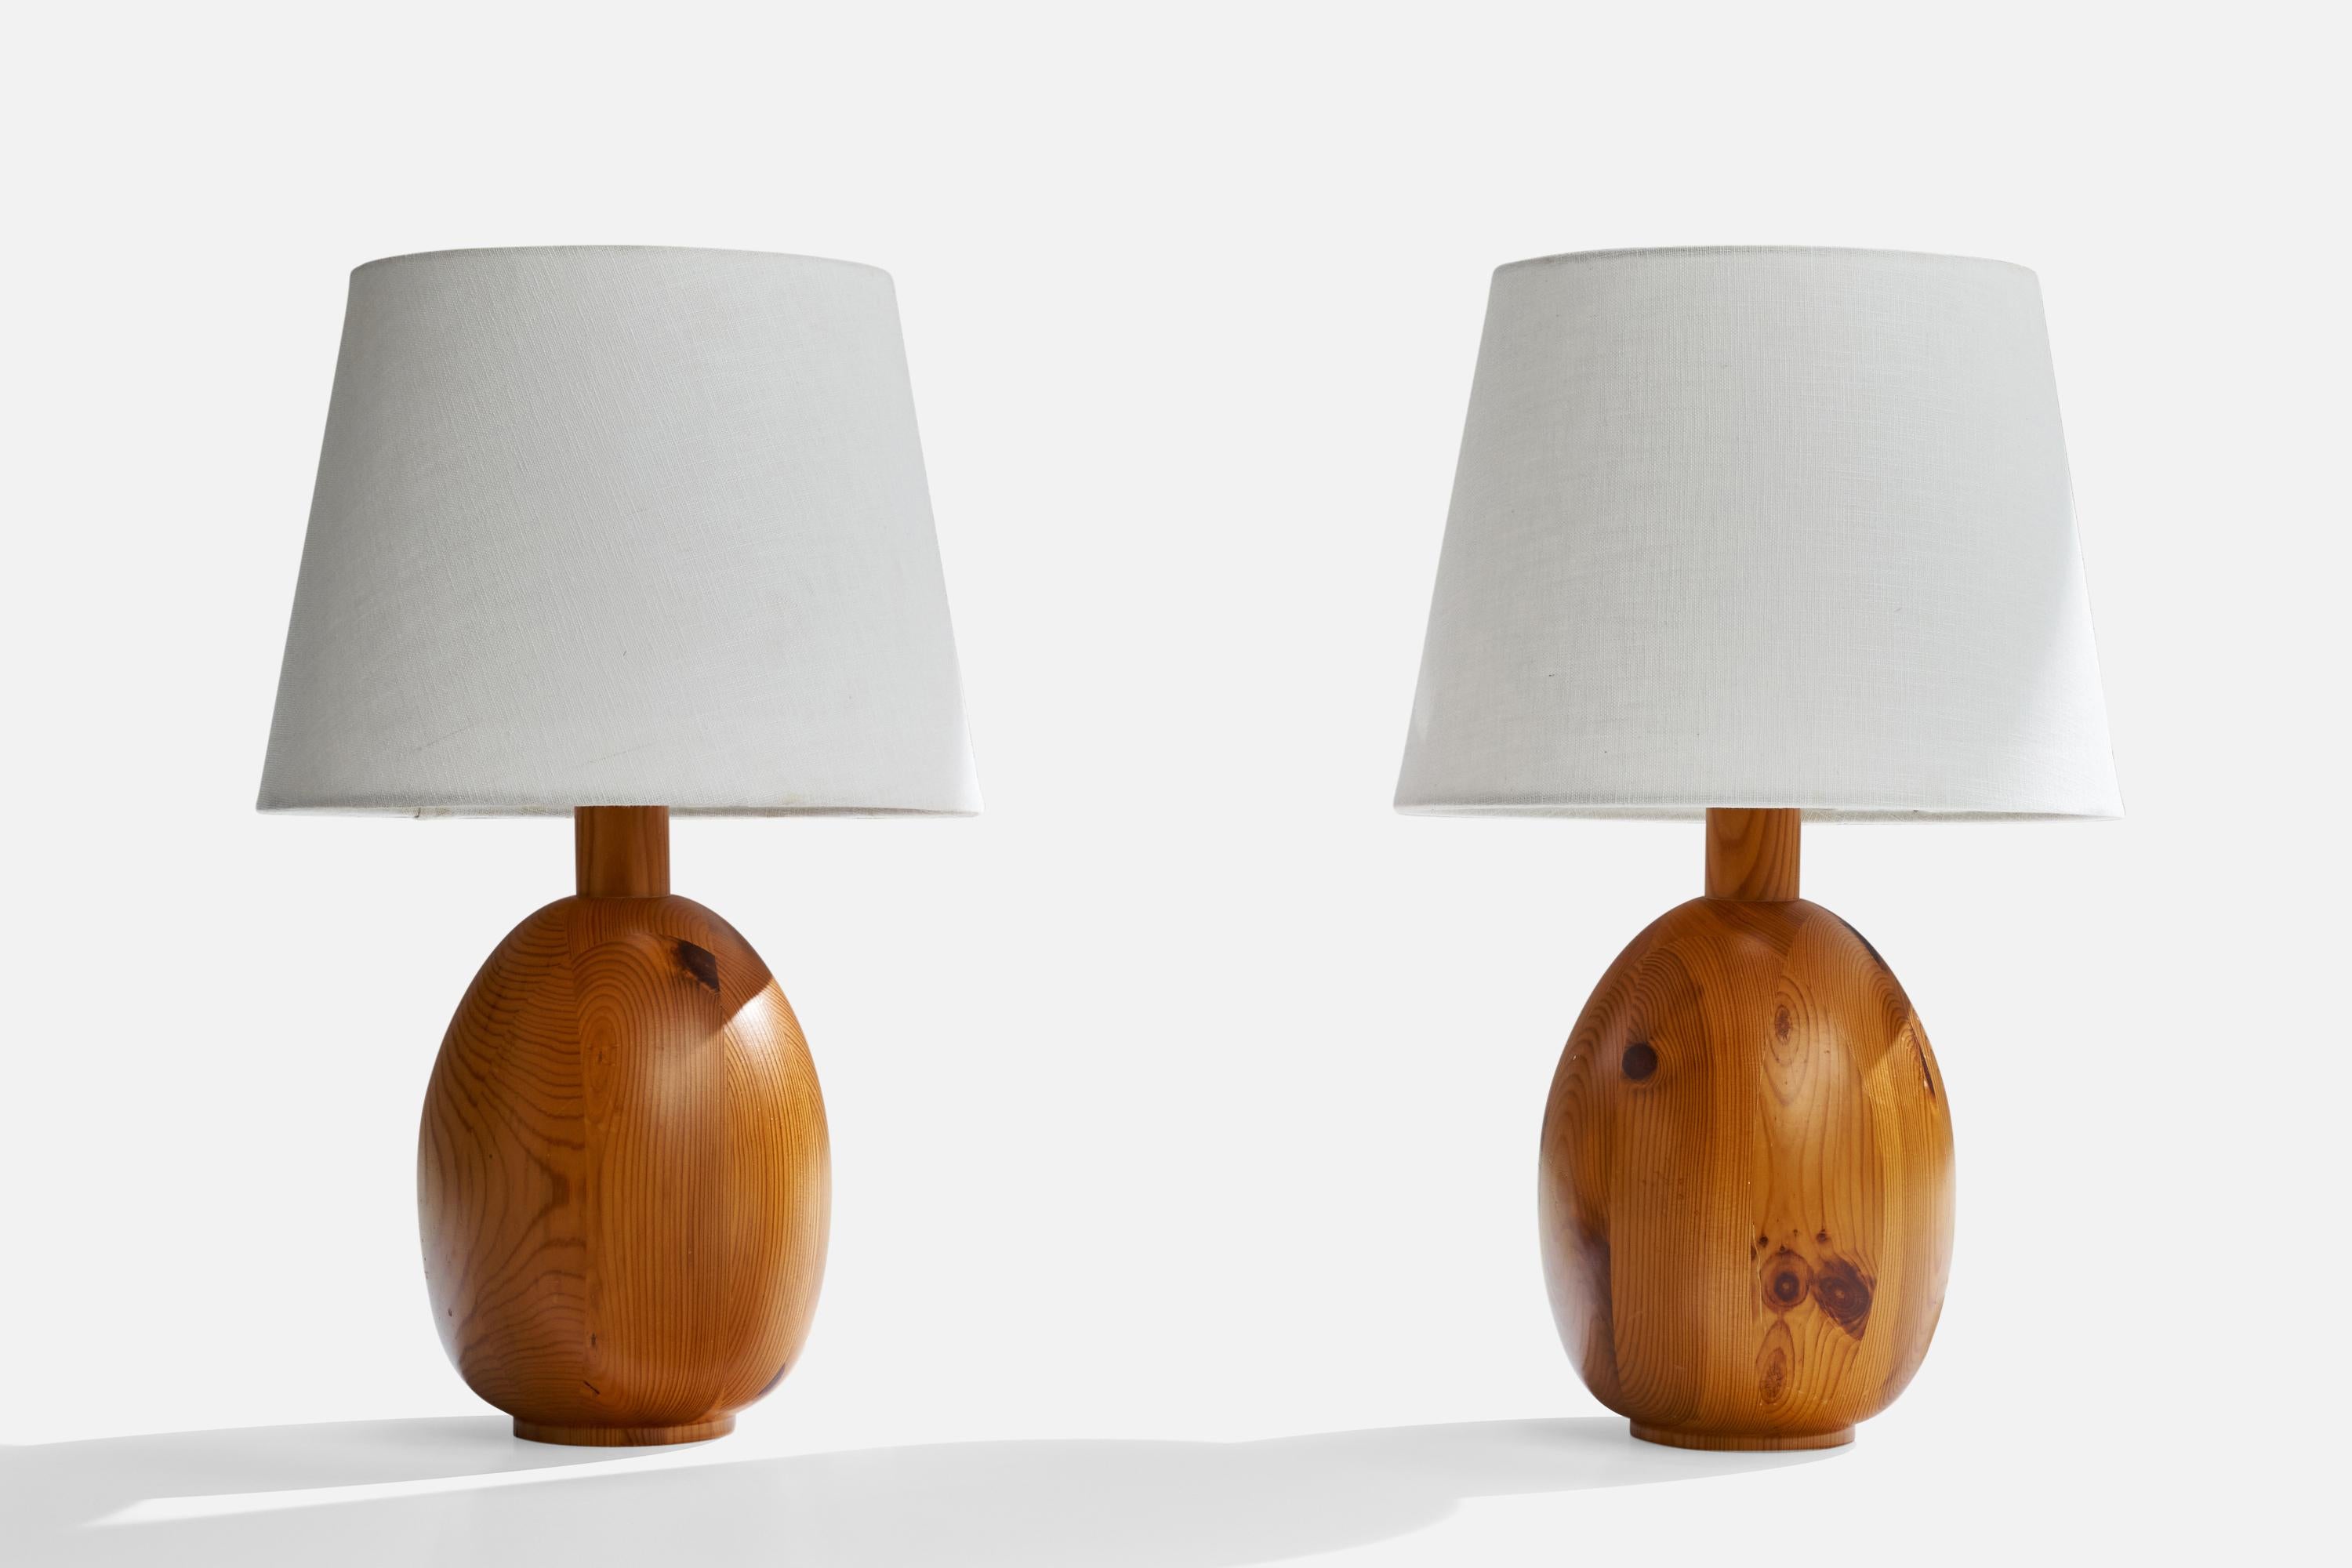 A pair of pine table lamps designed and produced by Markslöjd, Sweden, 1970s.

Dimensions of Lamp (inches): 14” H x 7” Diameter
Dimensions of Shade (inches): 9” Top Diameter x 12” Bottom Diameter x 9” H 
Dimensions of Lamp with Shade (inches): 19.5”